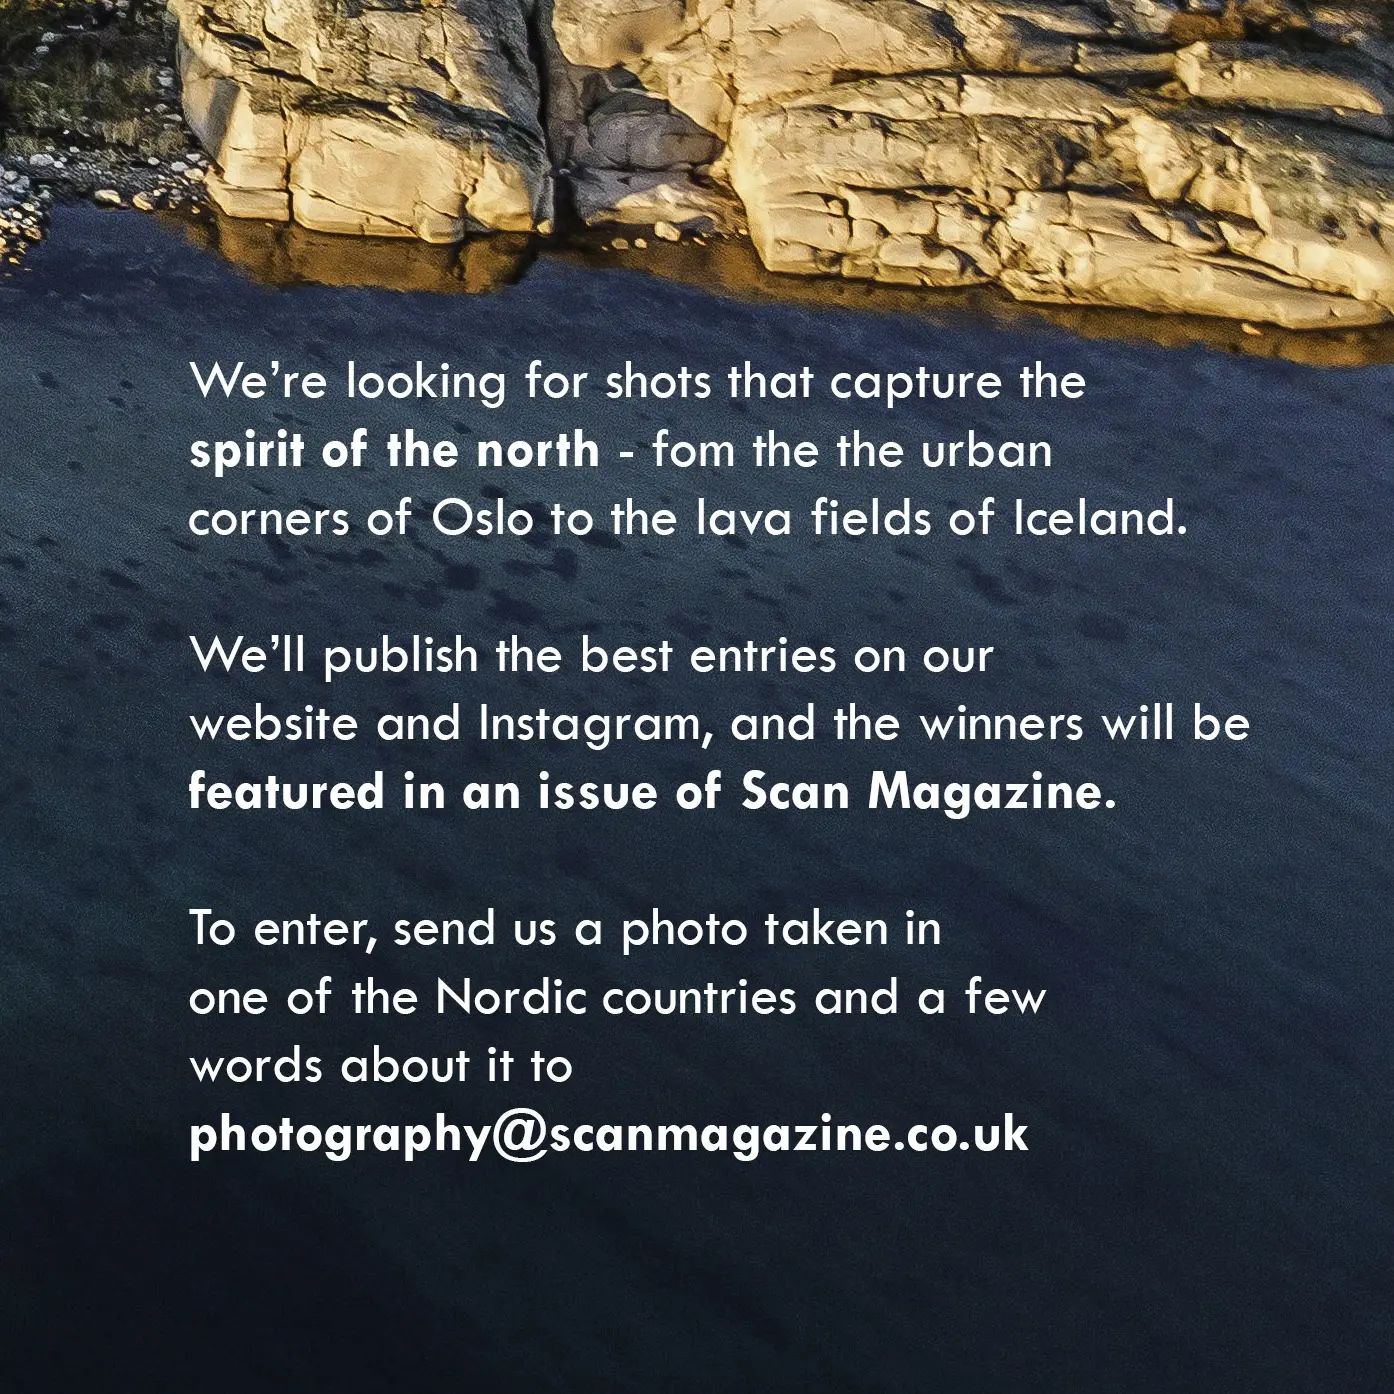 Scan Magazine Nordic Travel Photography Competition